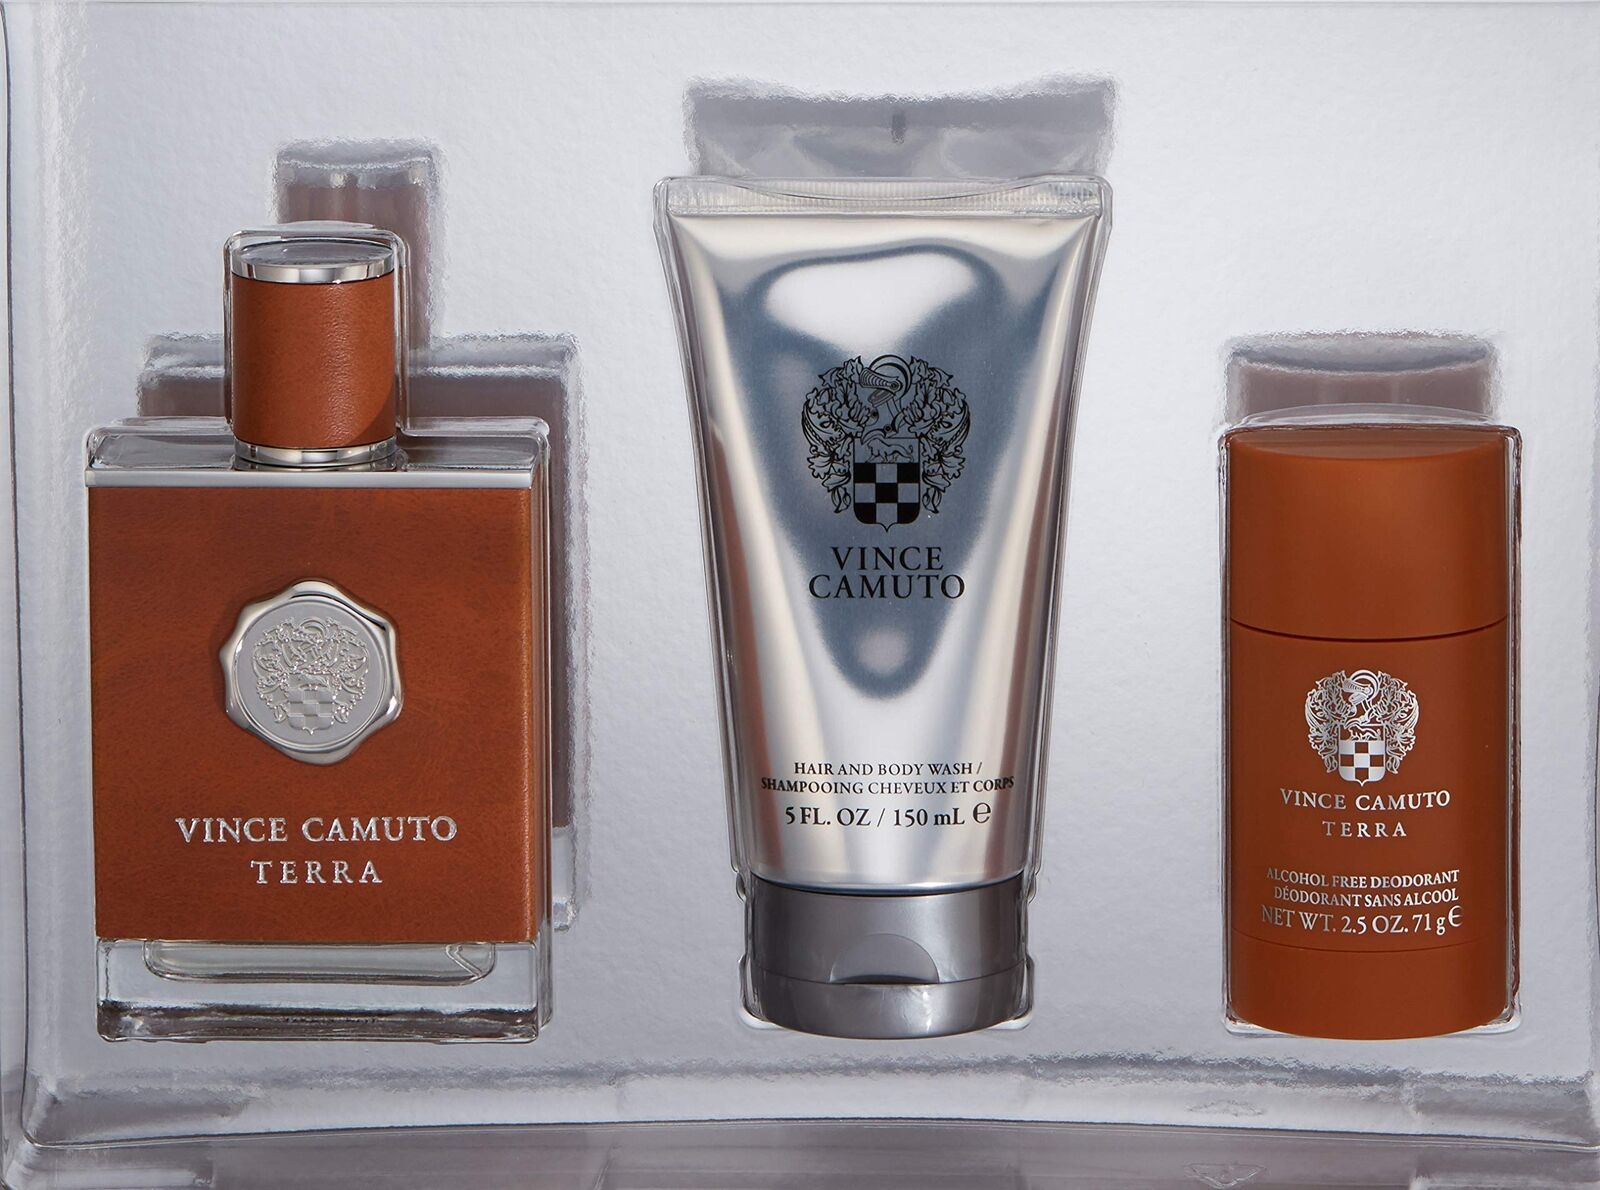  Vince Camuto Terra Extreme 3 Piece Gift Set, 3.4 fl